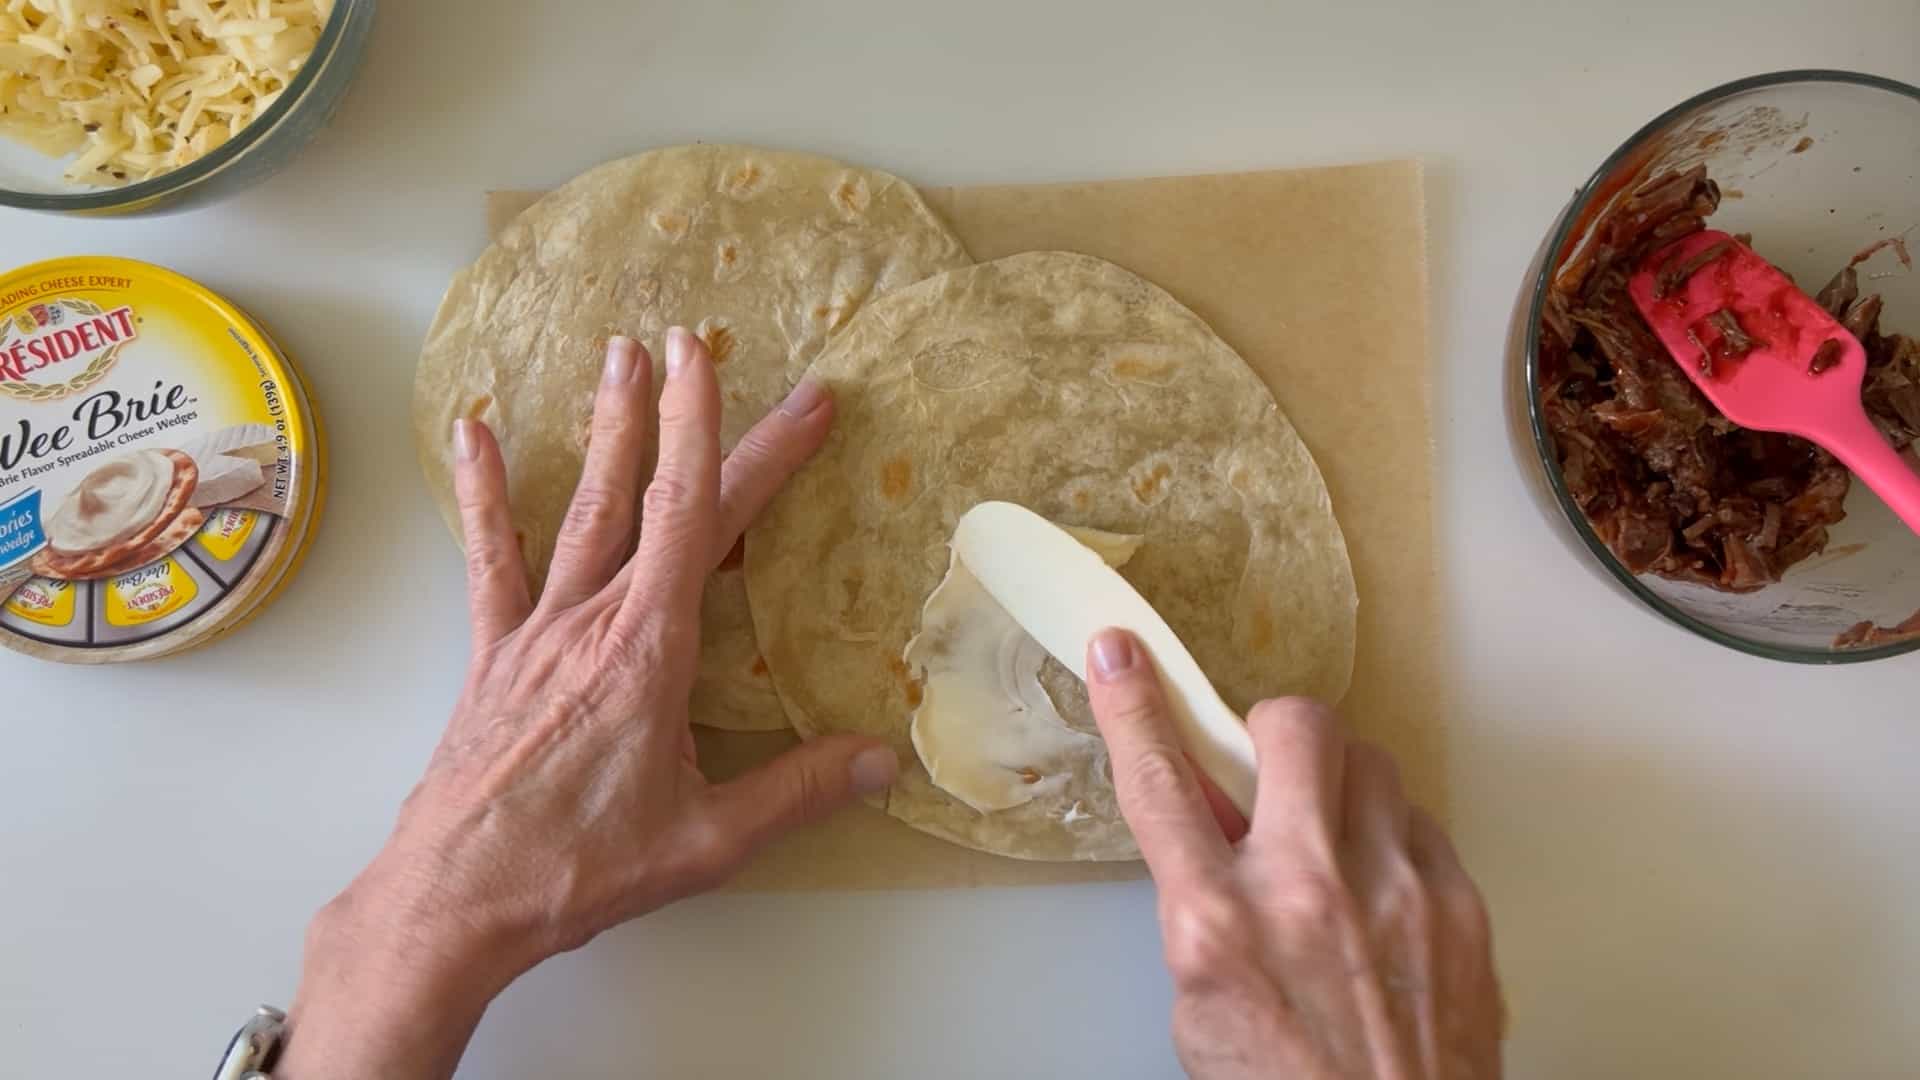 spreading flour tortillas with Brie